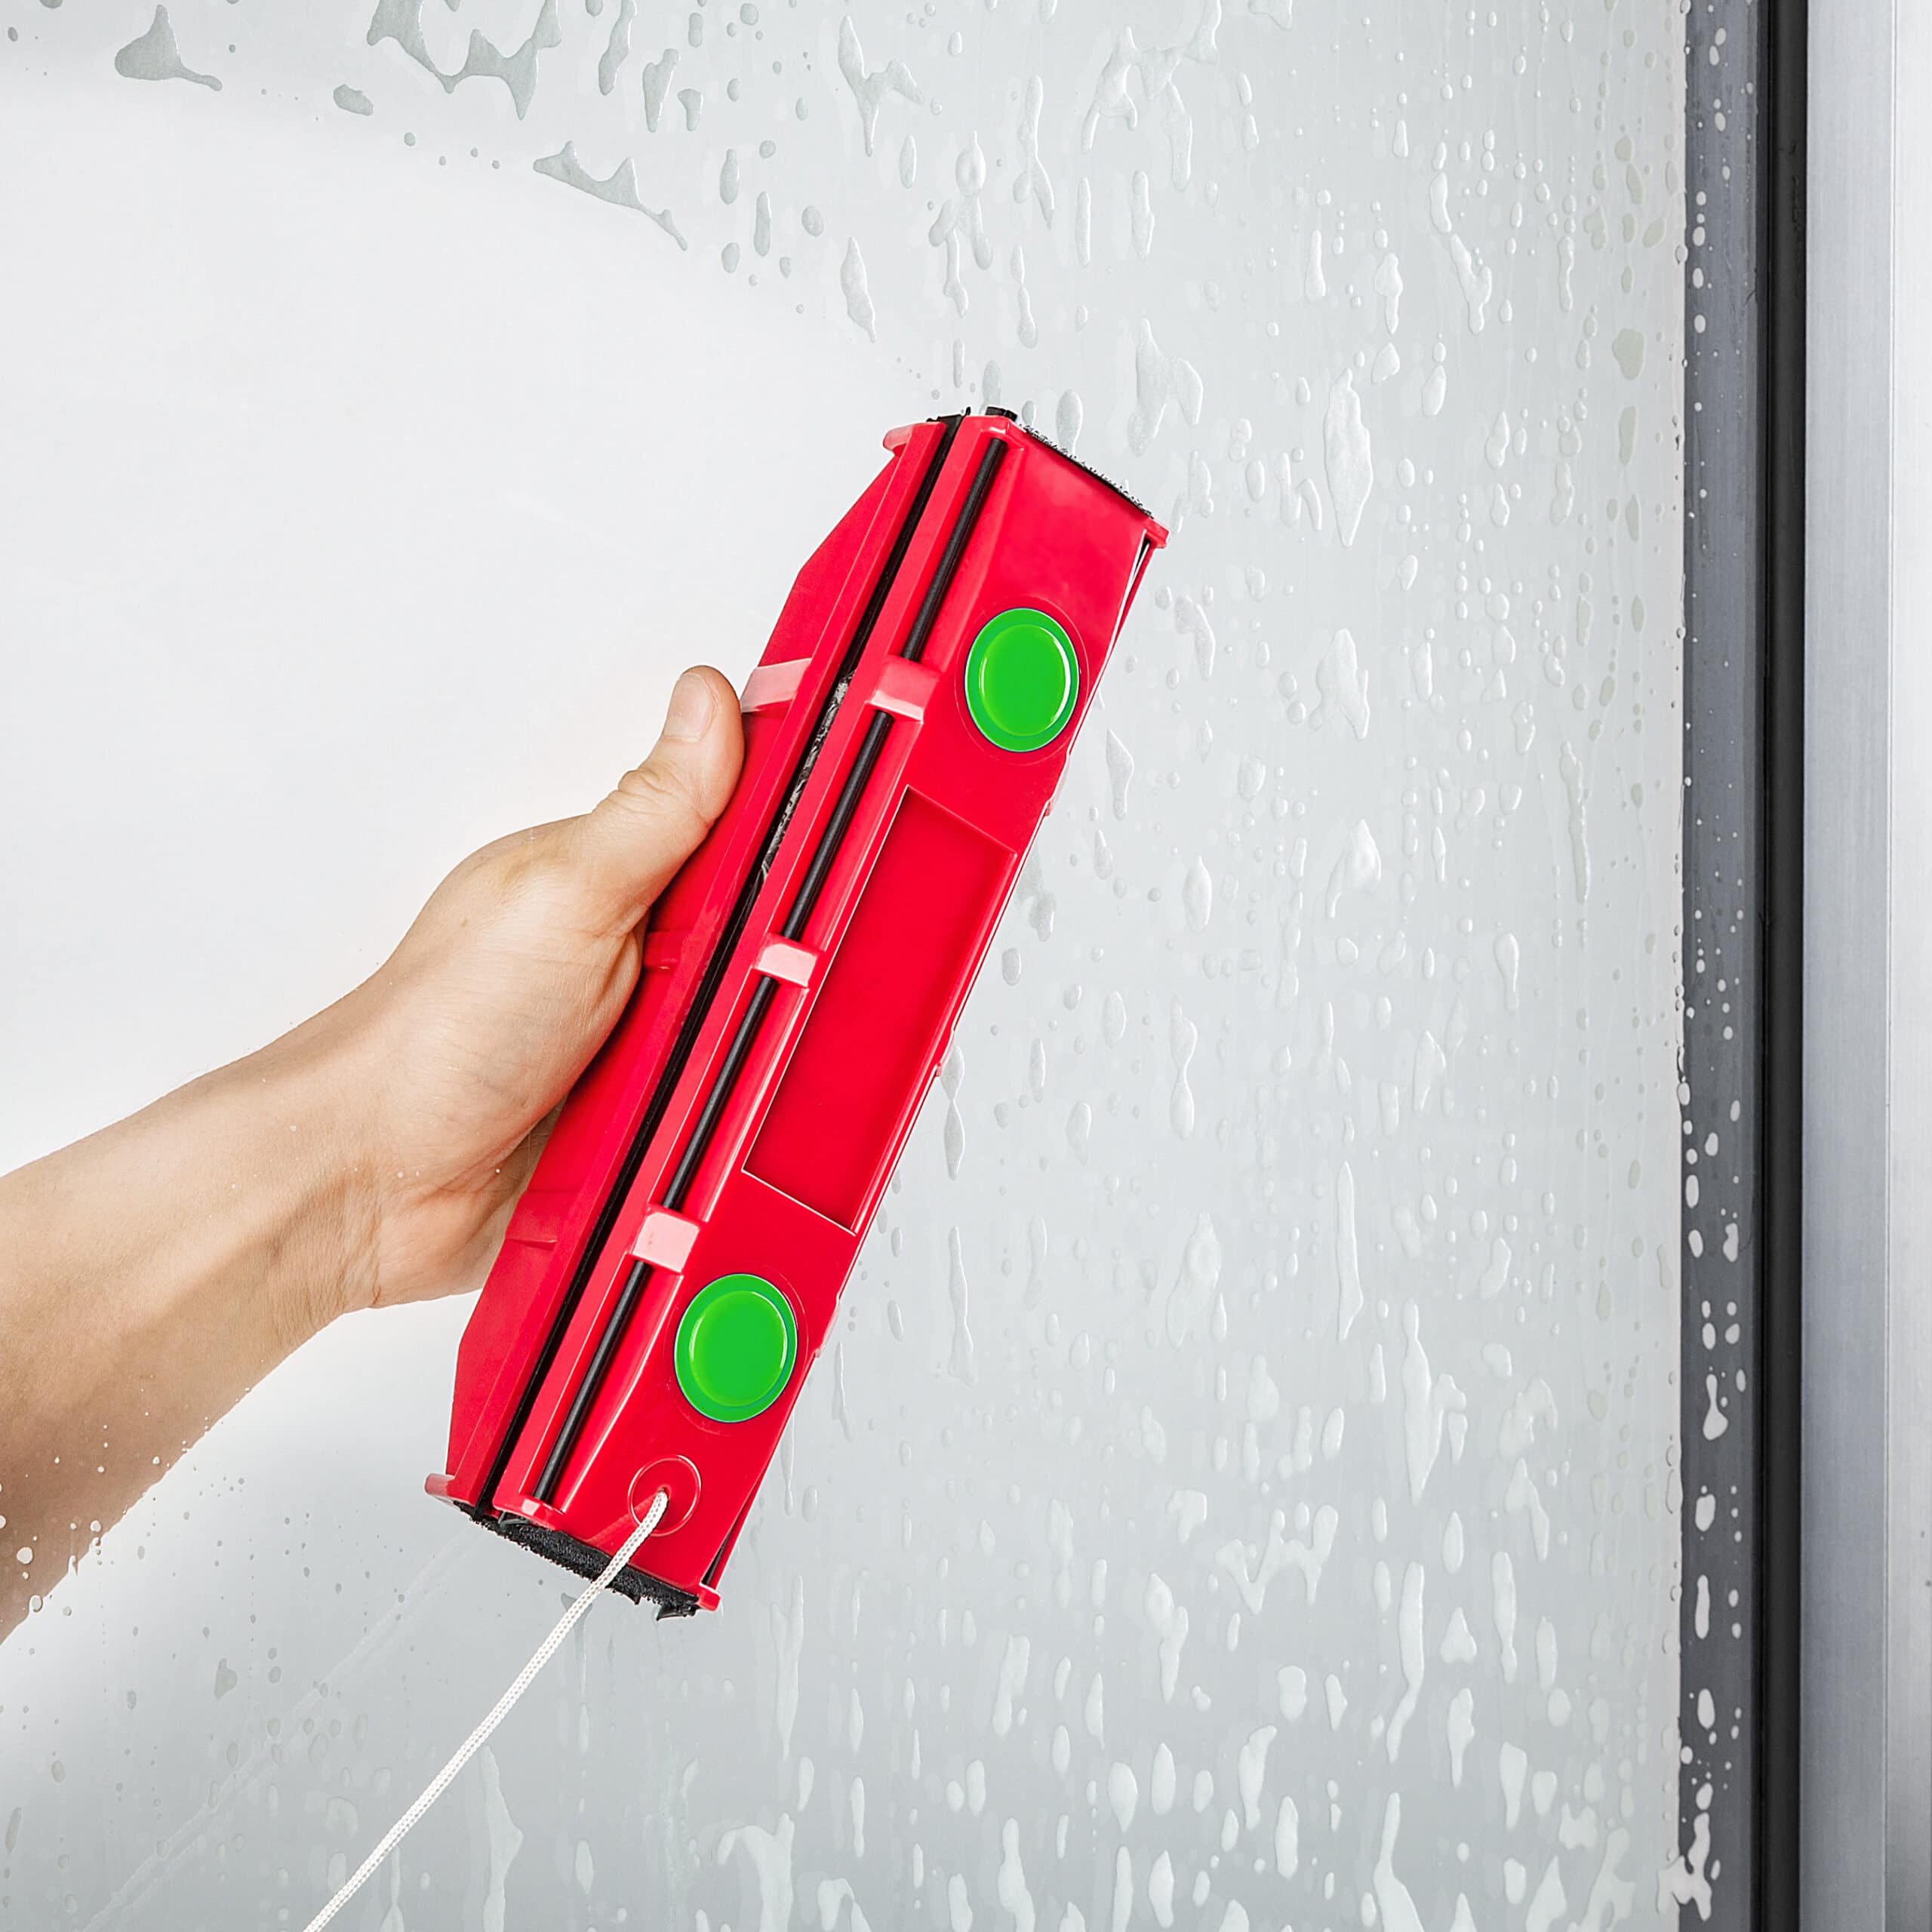 The Glider D3 magnetic window cleaner